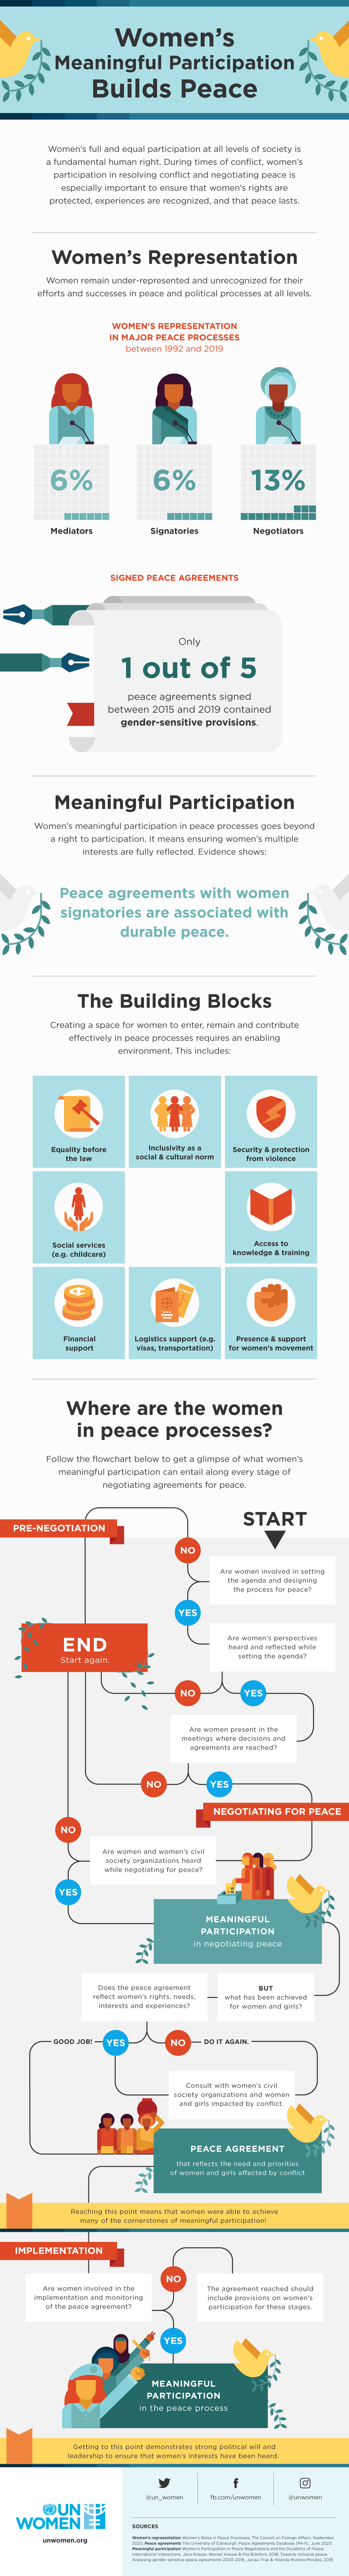 Women’s full and equal participation at all levels of society is a fundamental human right. During times of conflict, women’s participation in resolving conflict and negotiating peace is especially important to ensure that women’s rights are protected, experiences are recognized, and that peace lasts.